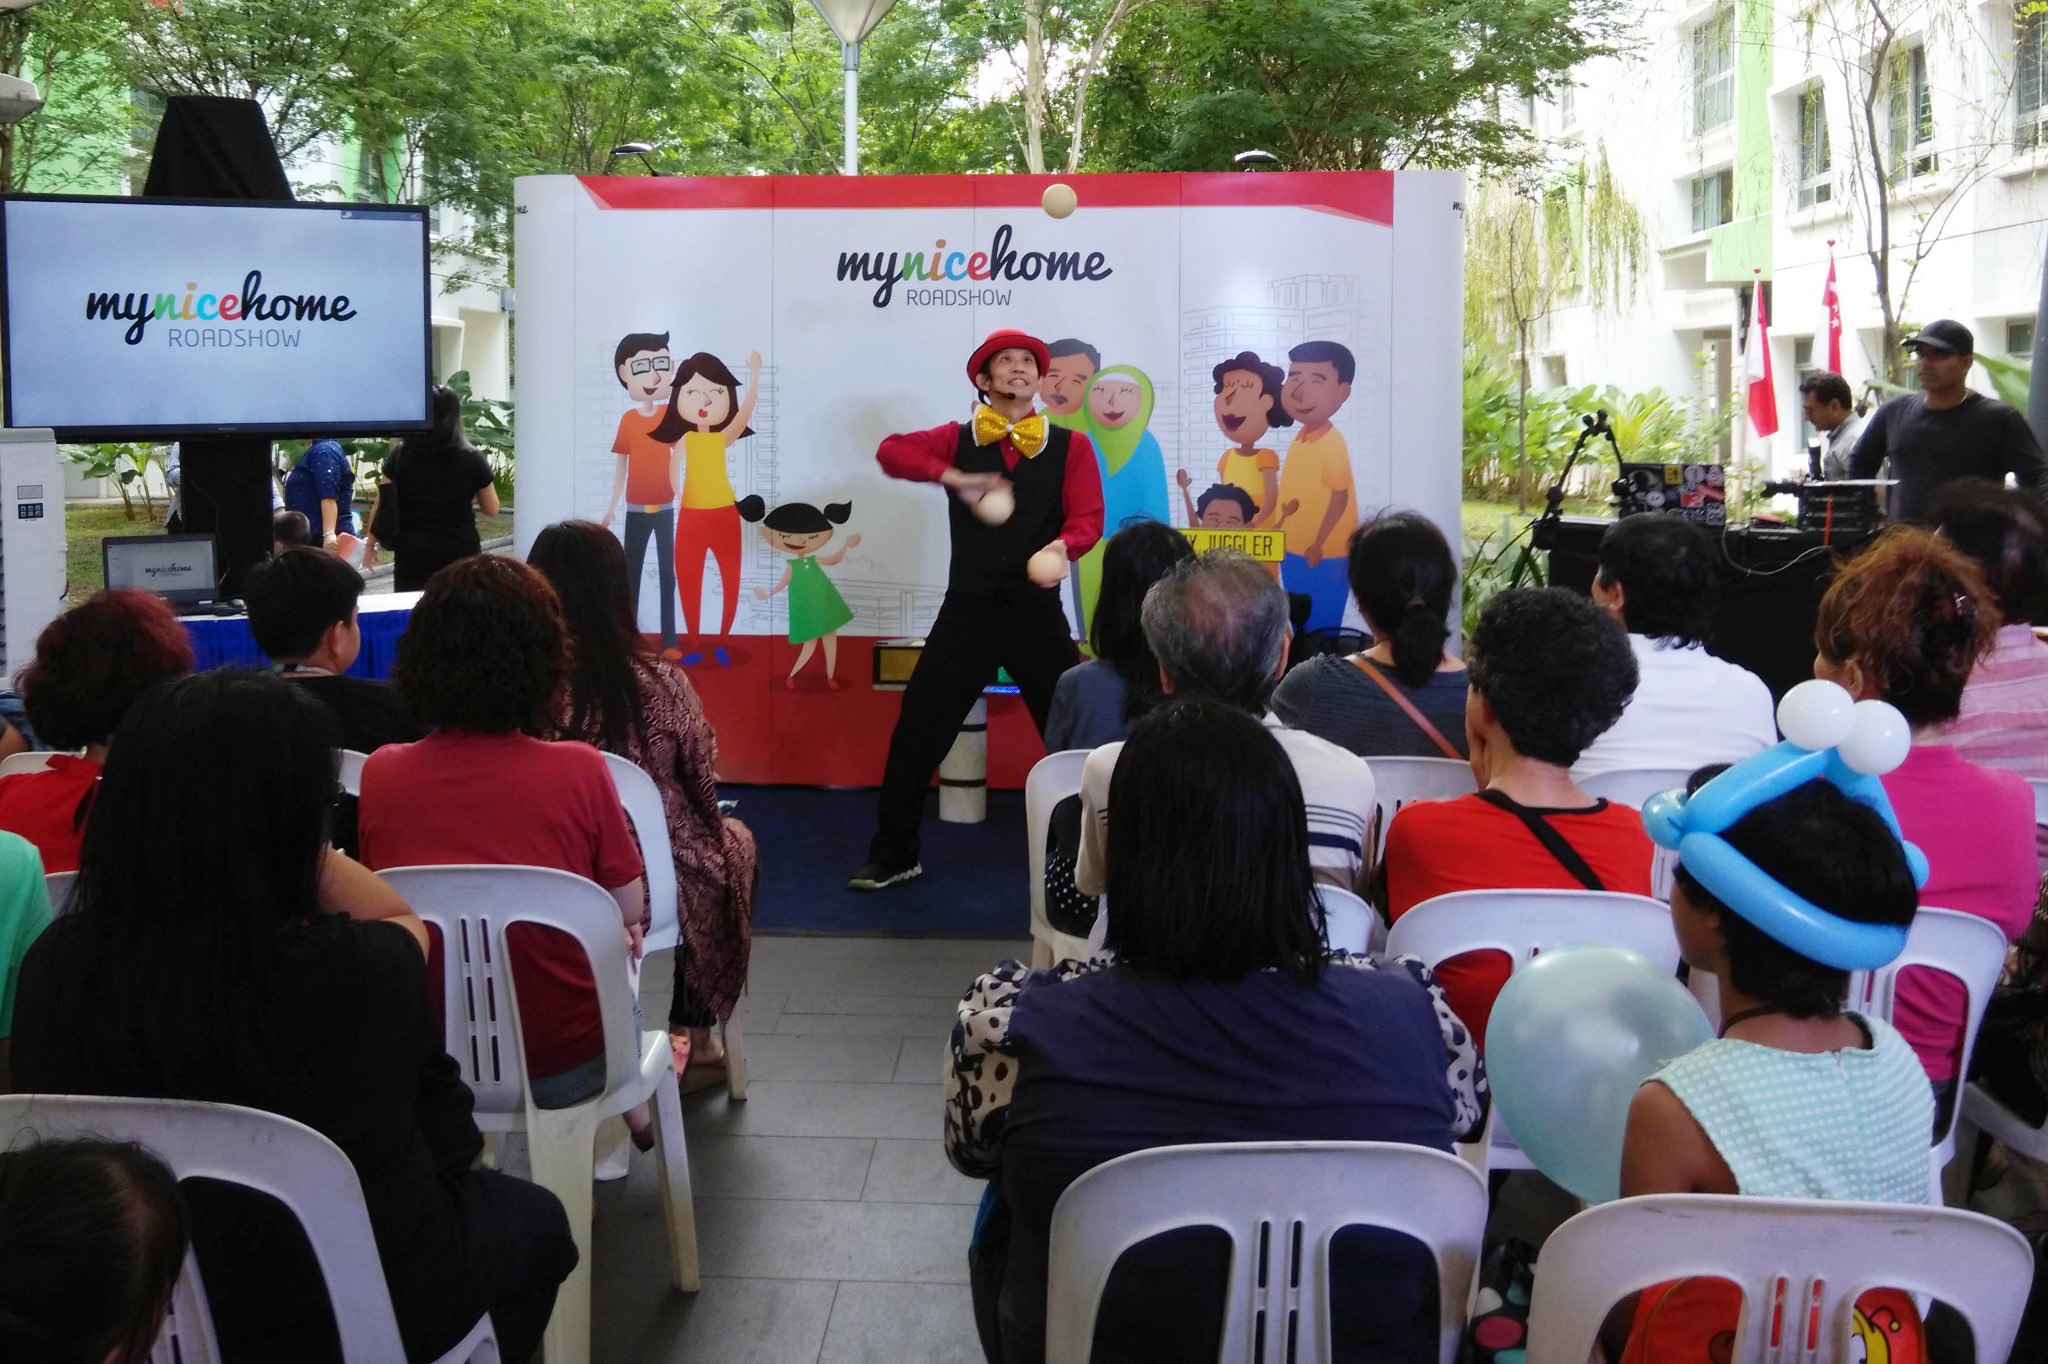 JimmyJuggler performs at roadshow event Singapore